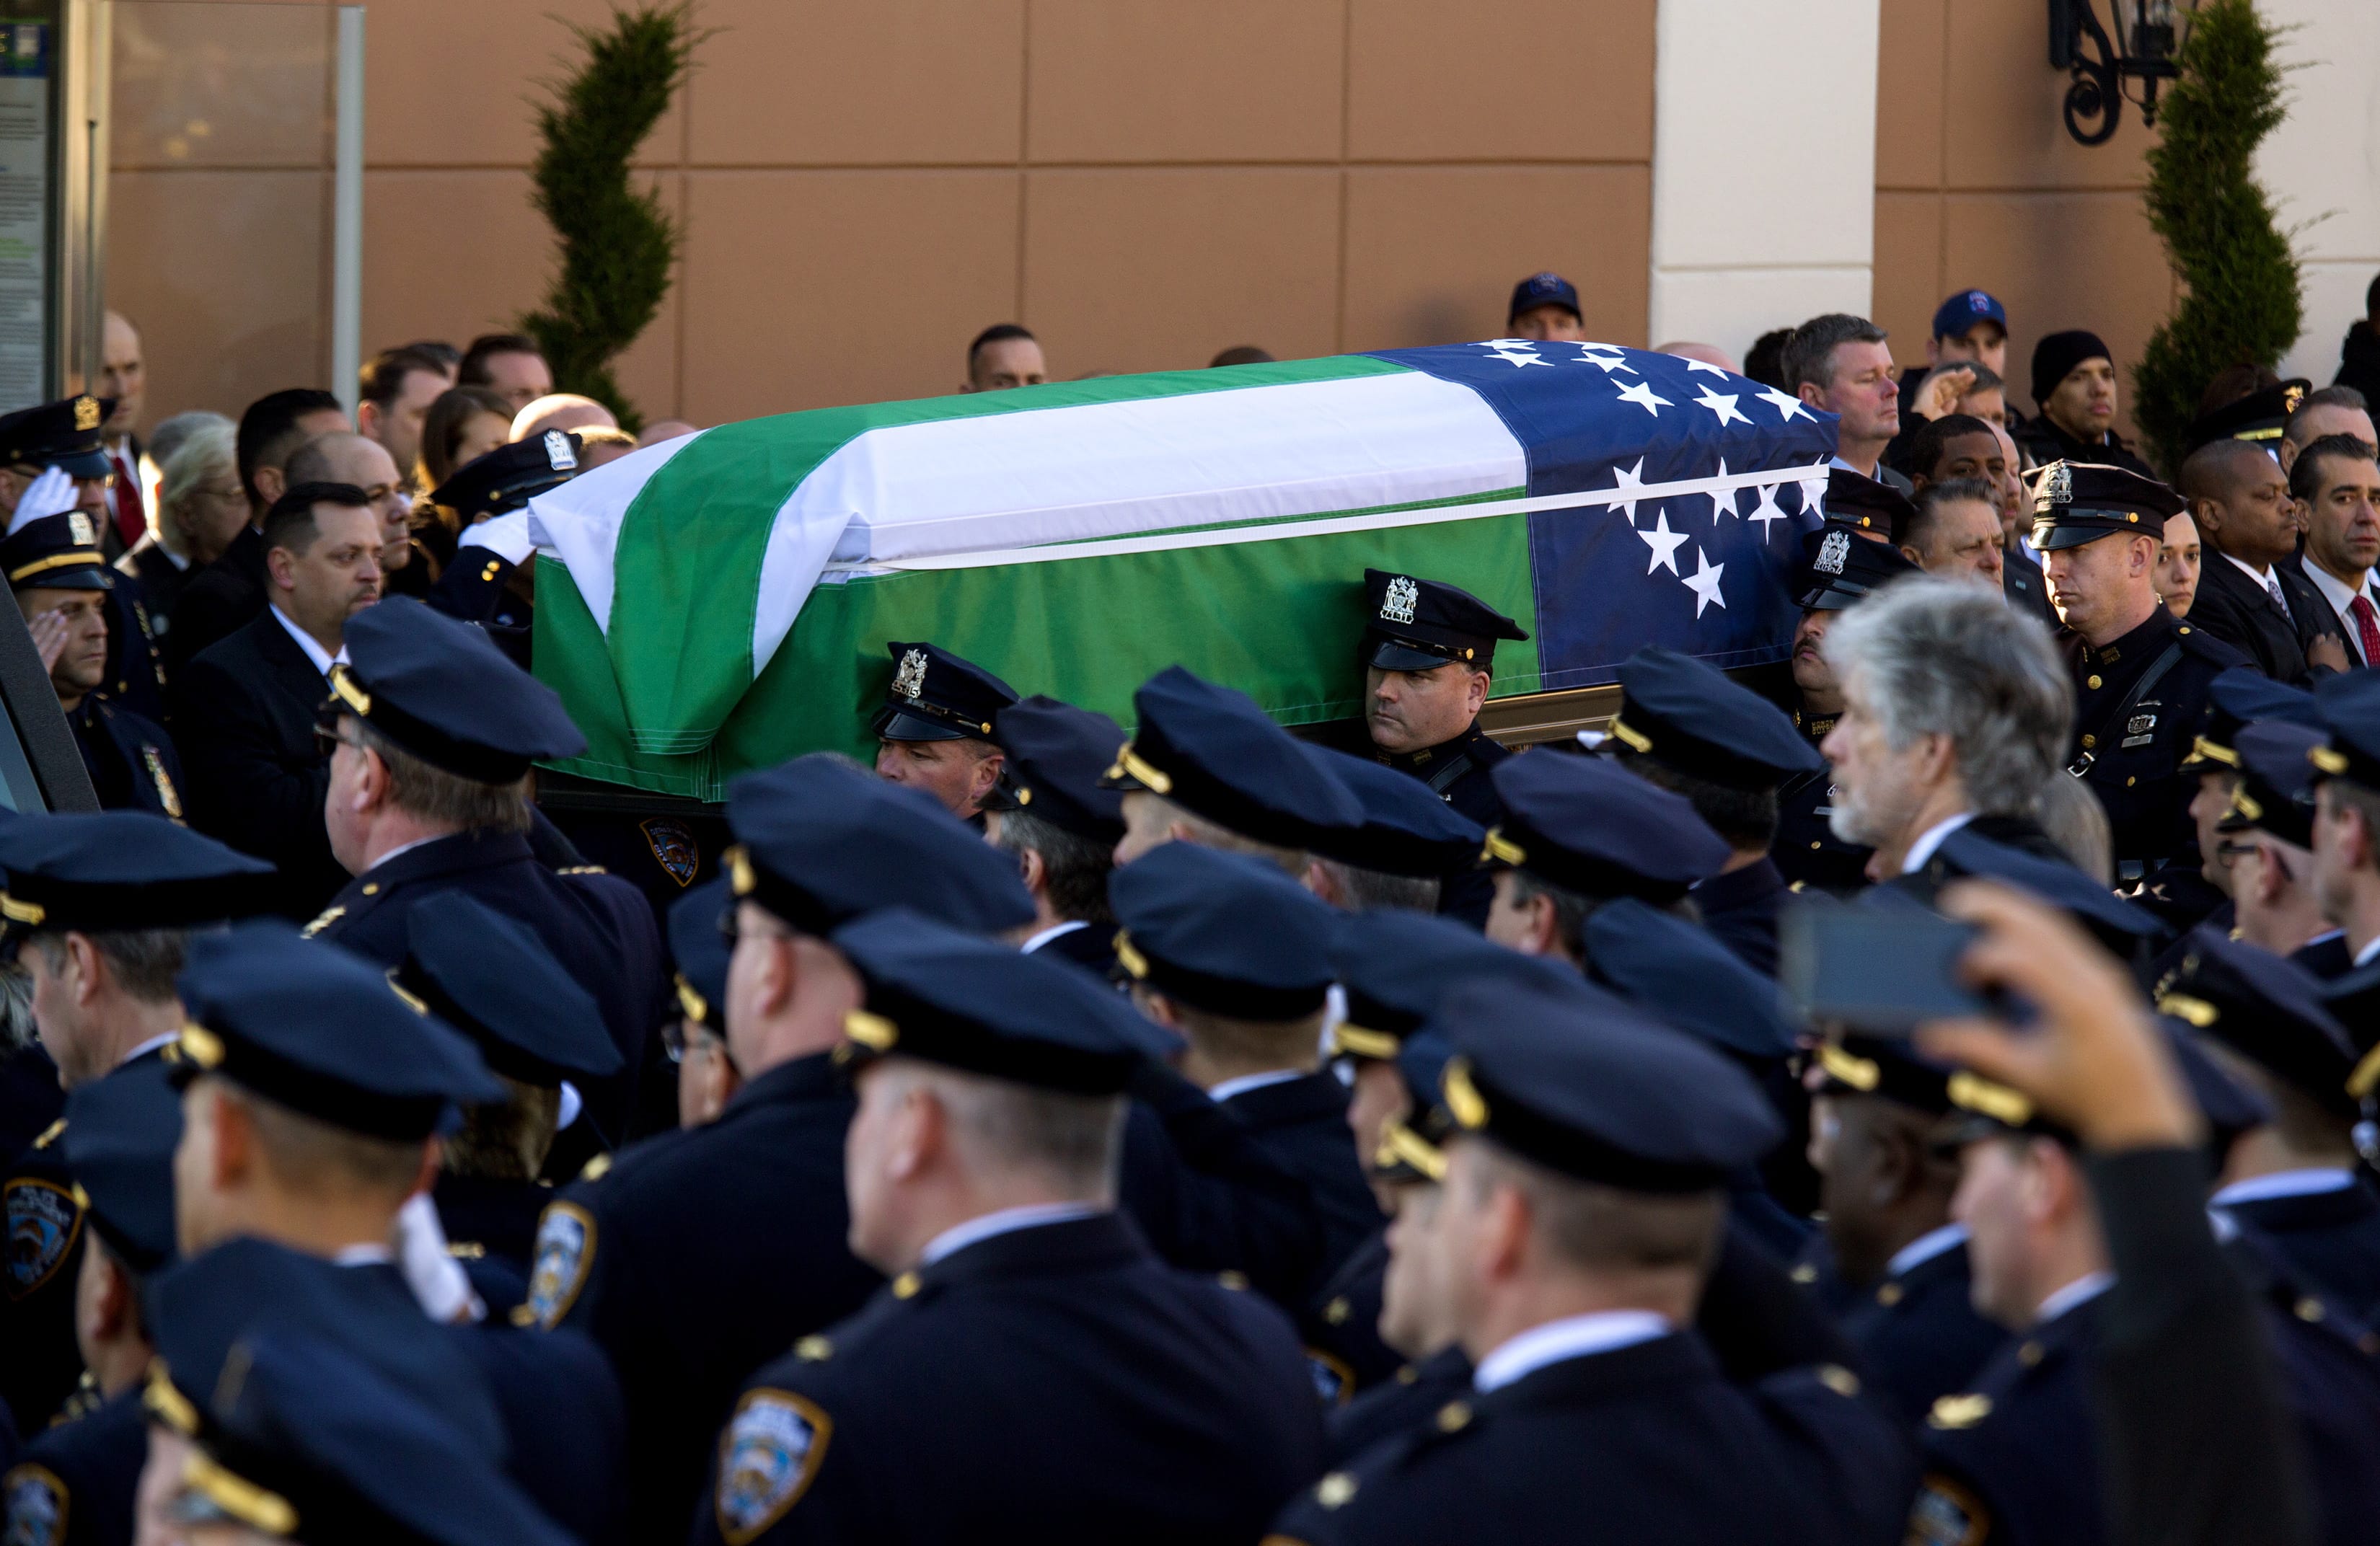 The body of New York City police officer Rafael Ramos is brought from Christ Tabernacle Church draped in an NYPD flag after his funeral Saturday in the Glendale section of Queens, where he was a church member. Ramos and his partner, officer Wenjian Liu, were killed Dec. 20 as they sat in their patrol car on a Brooklyn street.